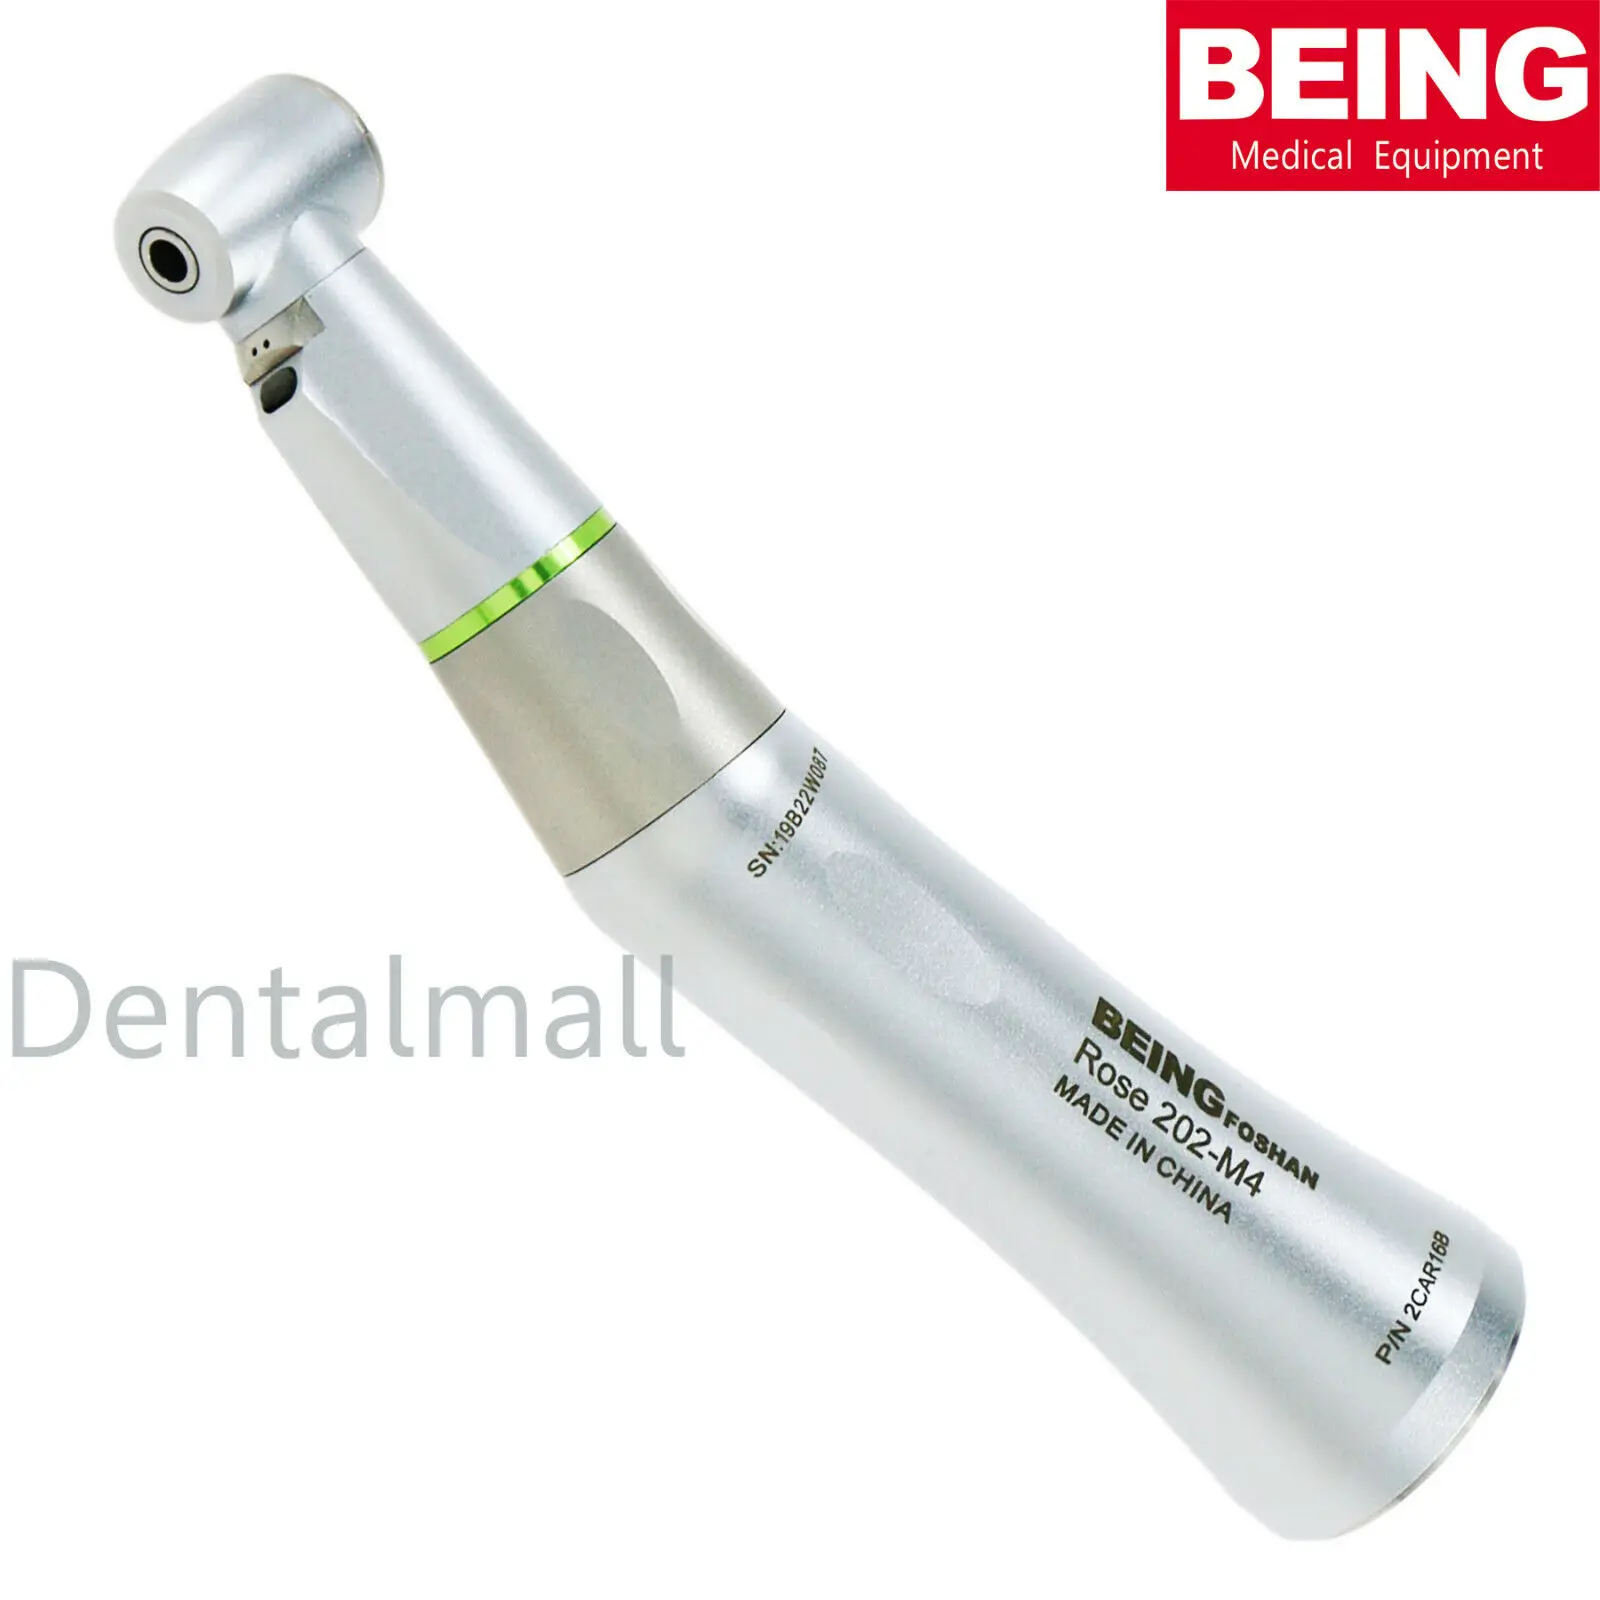 BEING Dental Fiber Optic Endo 16:1 Reduction Intra Head Low Speed Contra Angle Fit KaVo NSK Handpiece